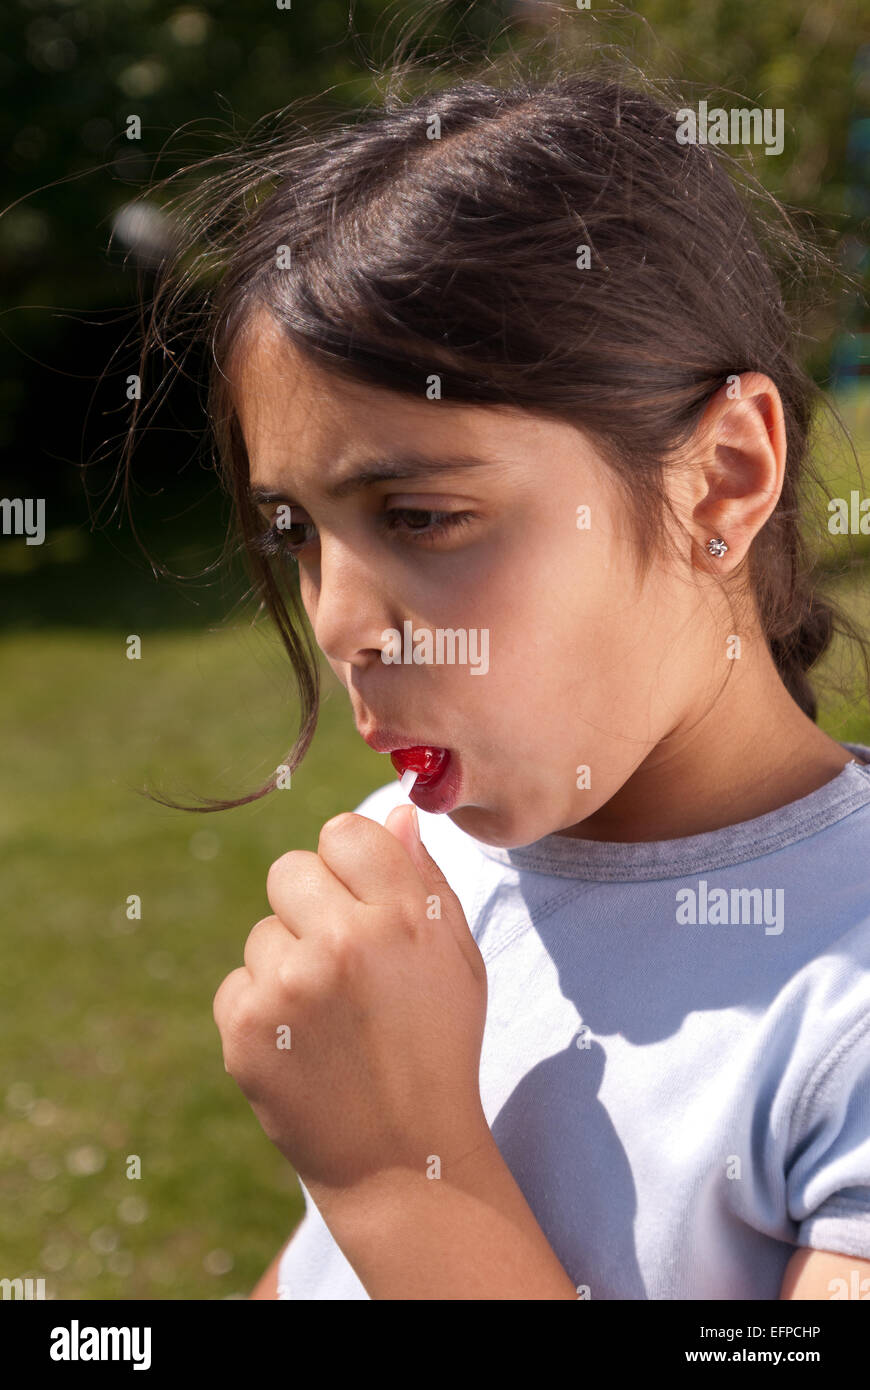 Happy child young girl outside sucking lollipop sweet on a paper handle need to look after teeth due sugar Stock Photo